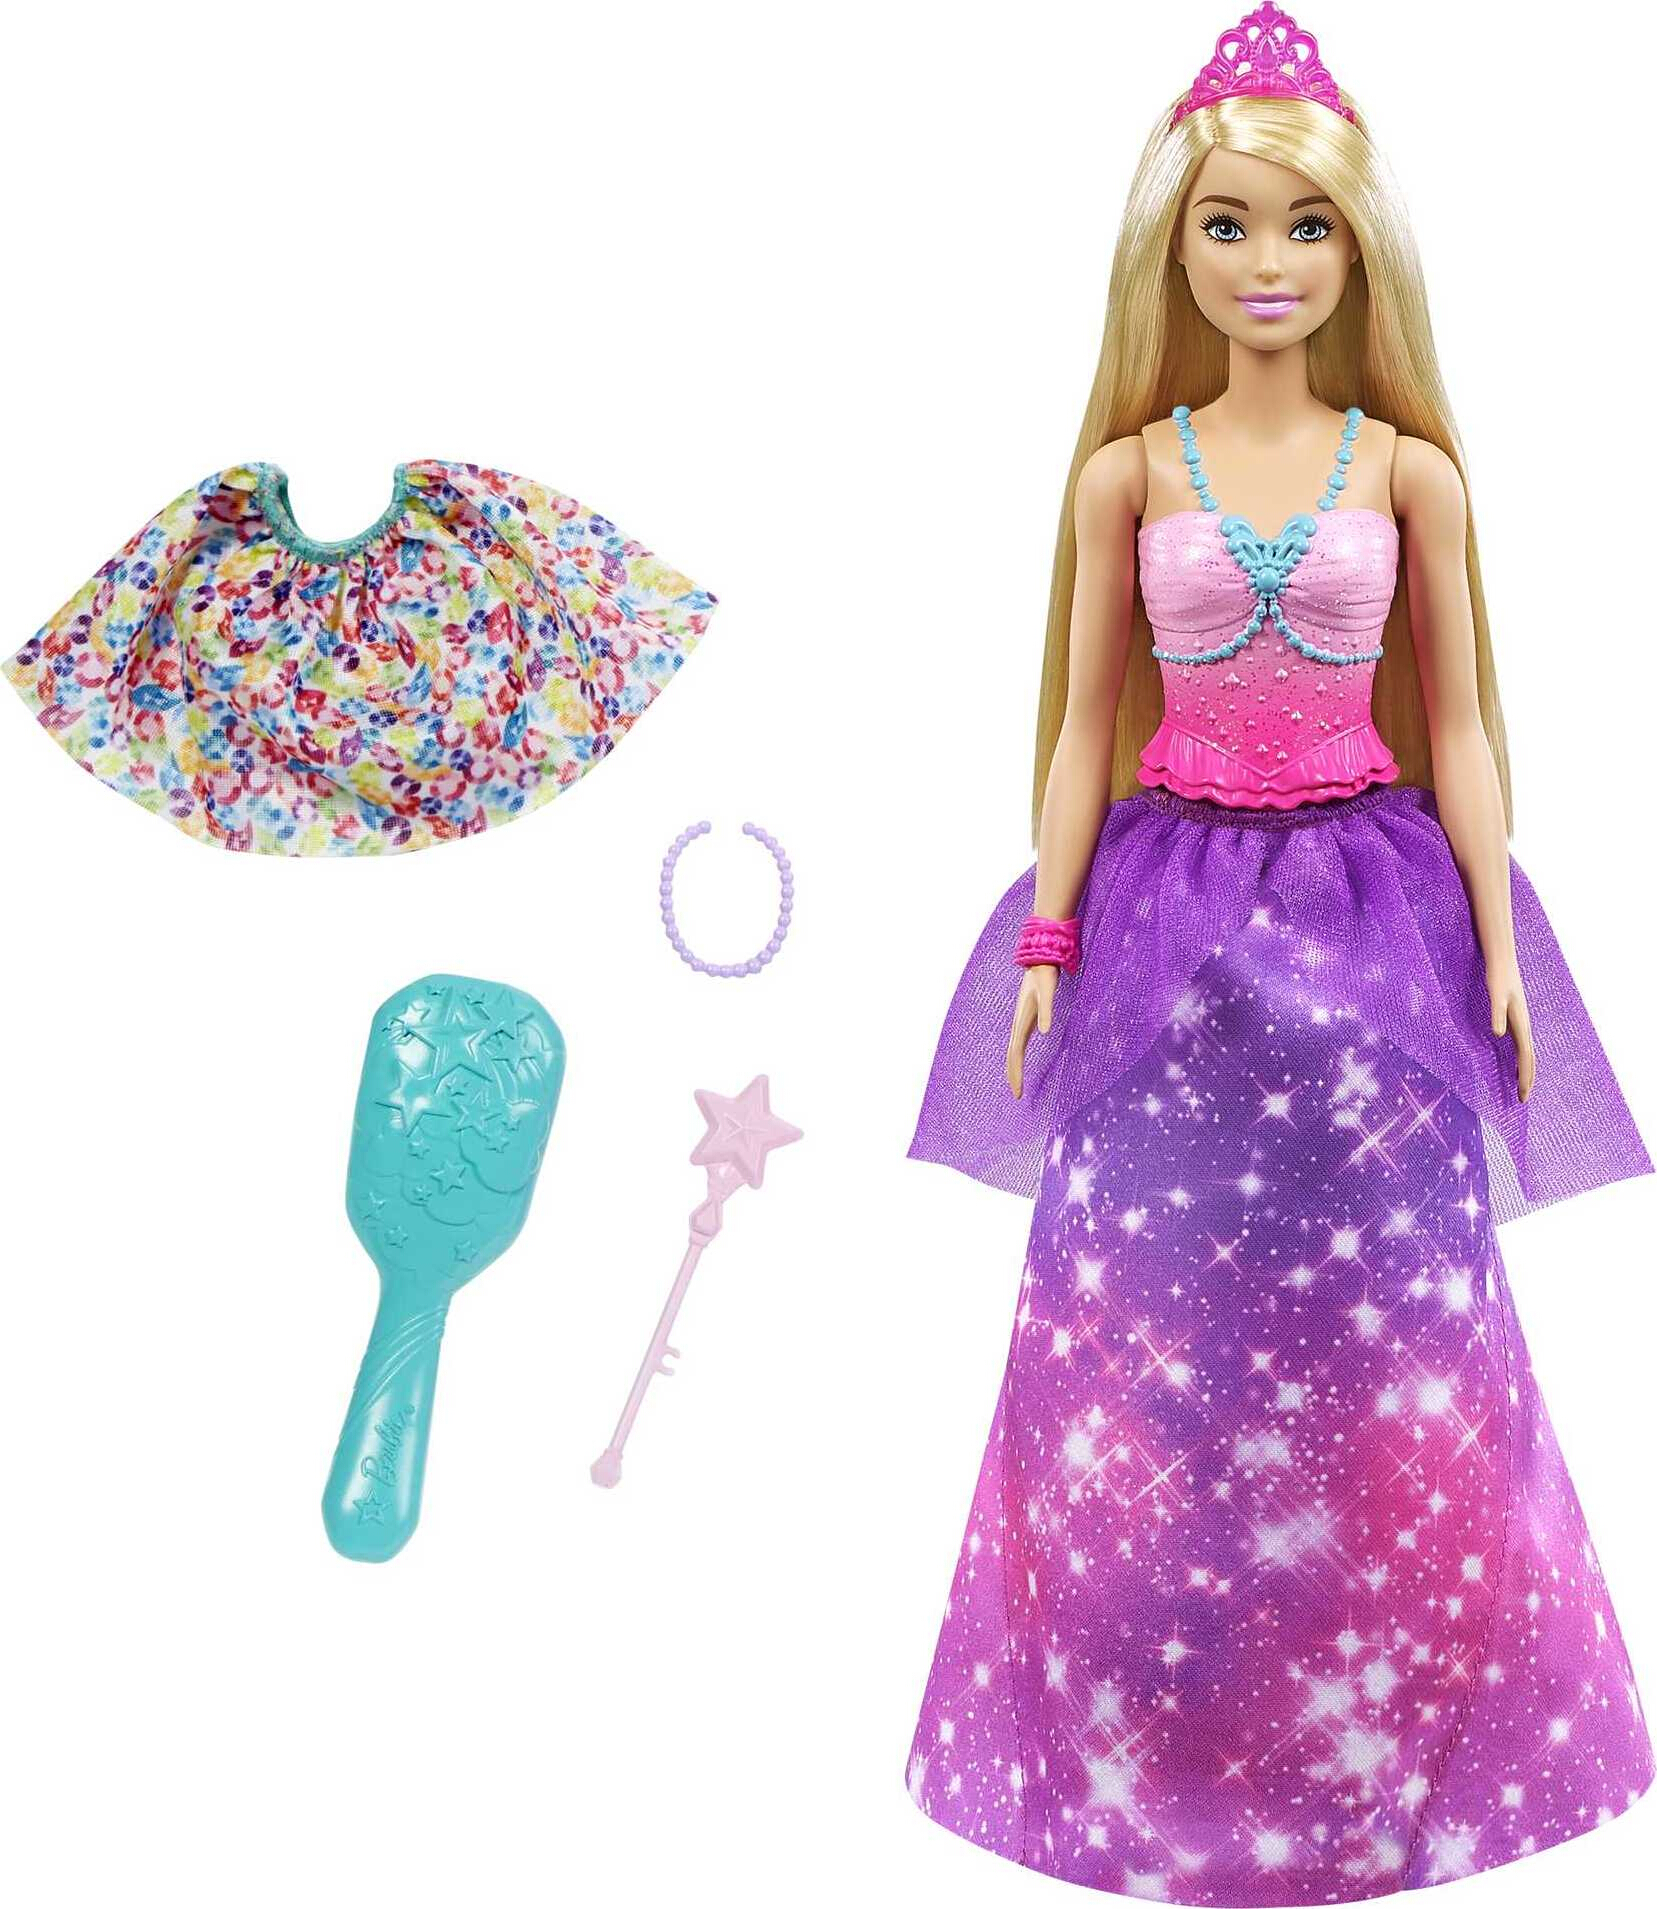 Barbie Dreamtopia Fantasy Doll, 2-in-1 Royal to Mermaid Transformation with Accessories - image 1 of 6